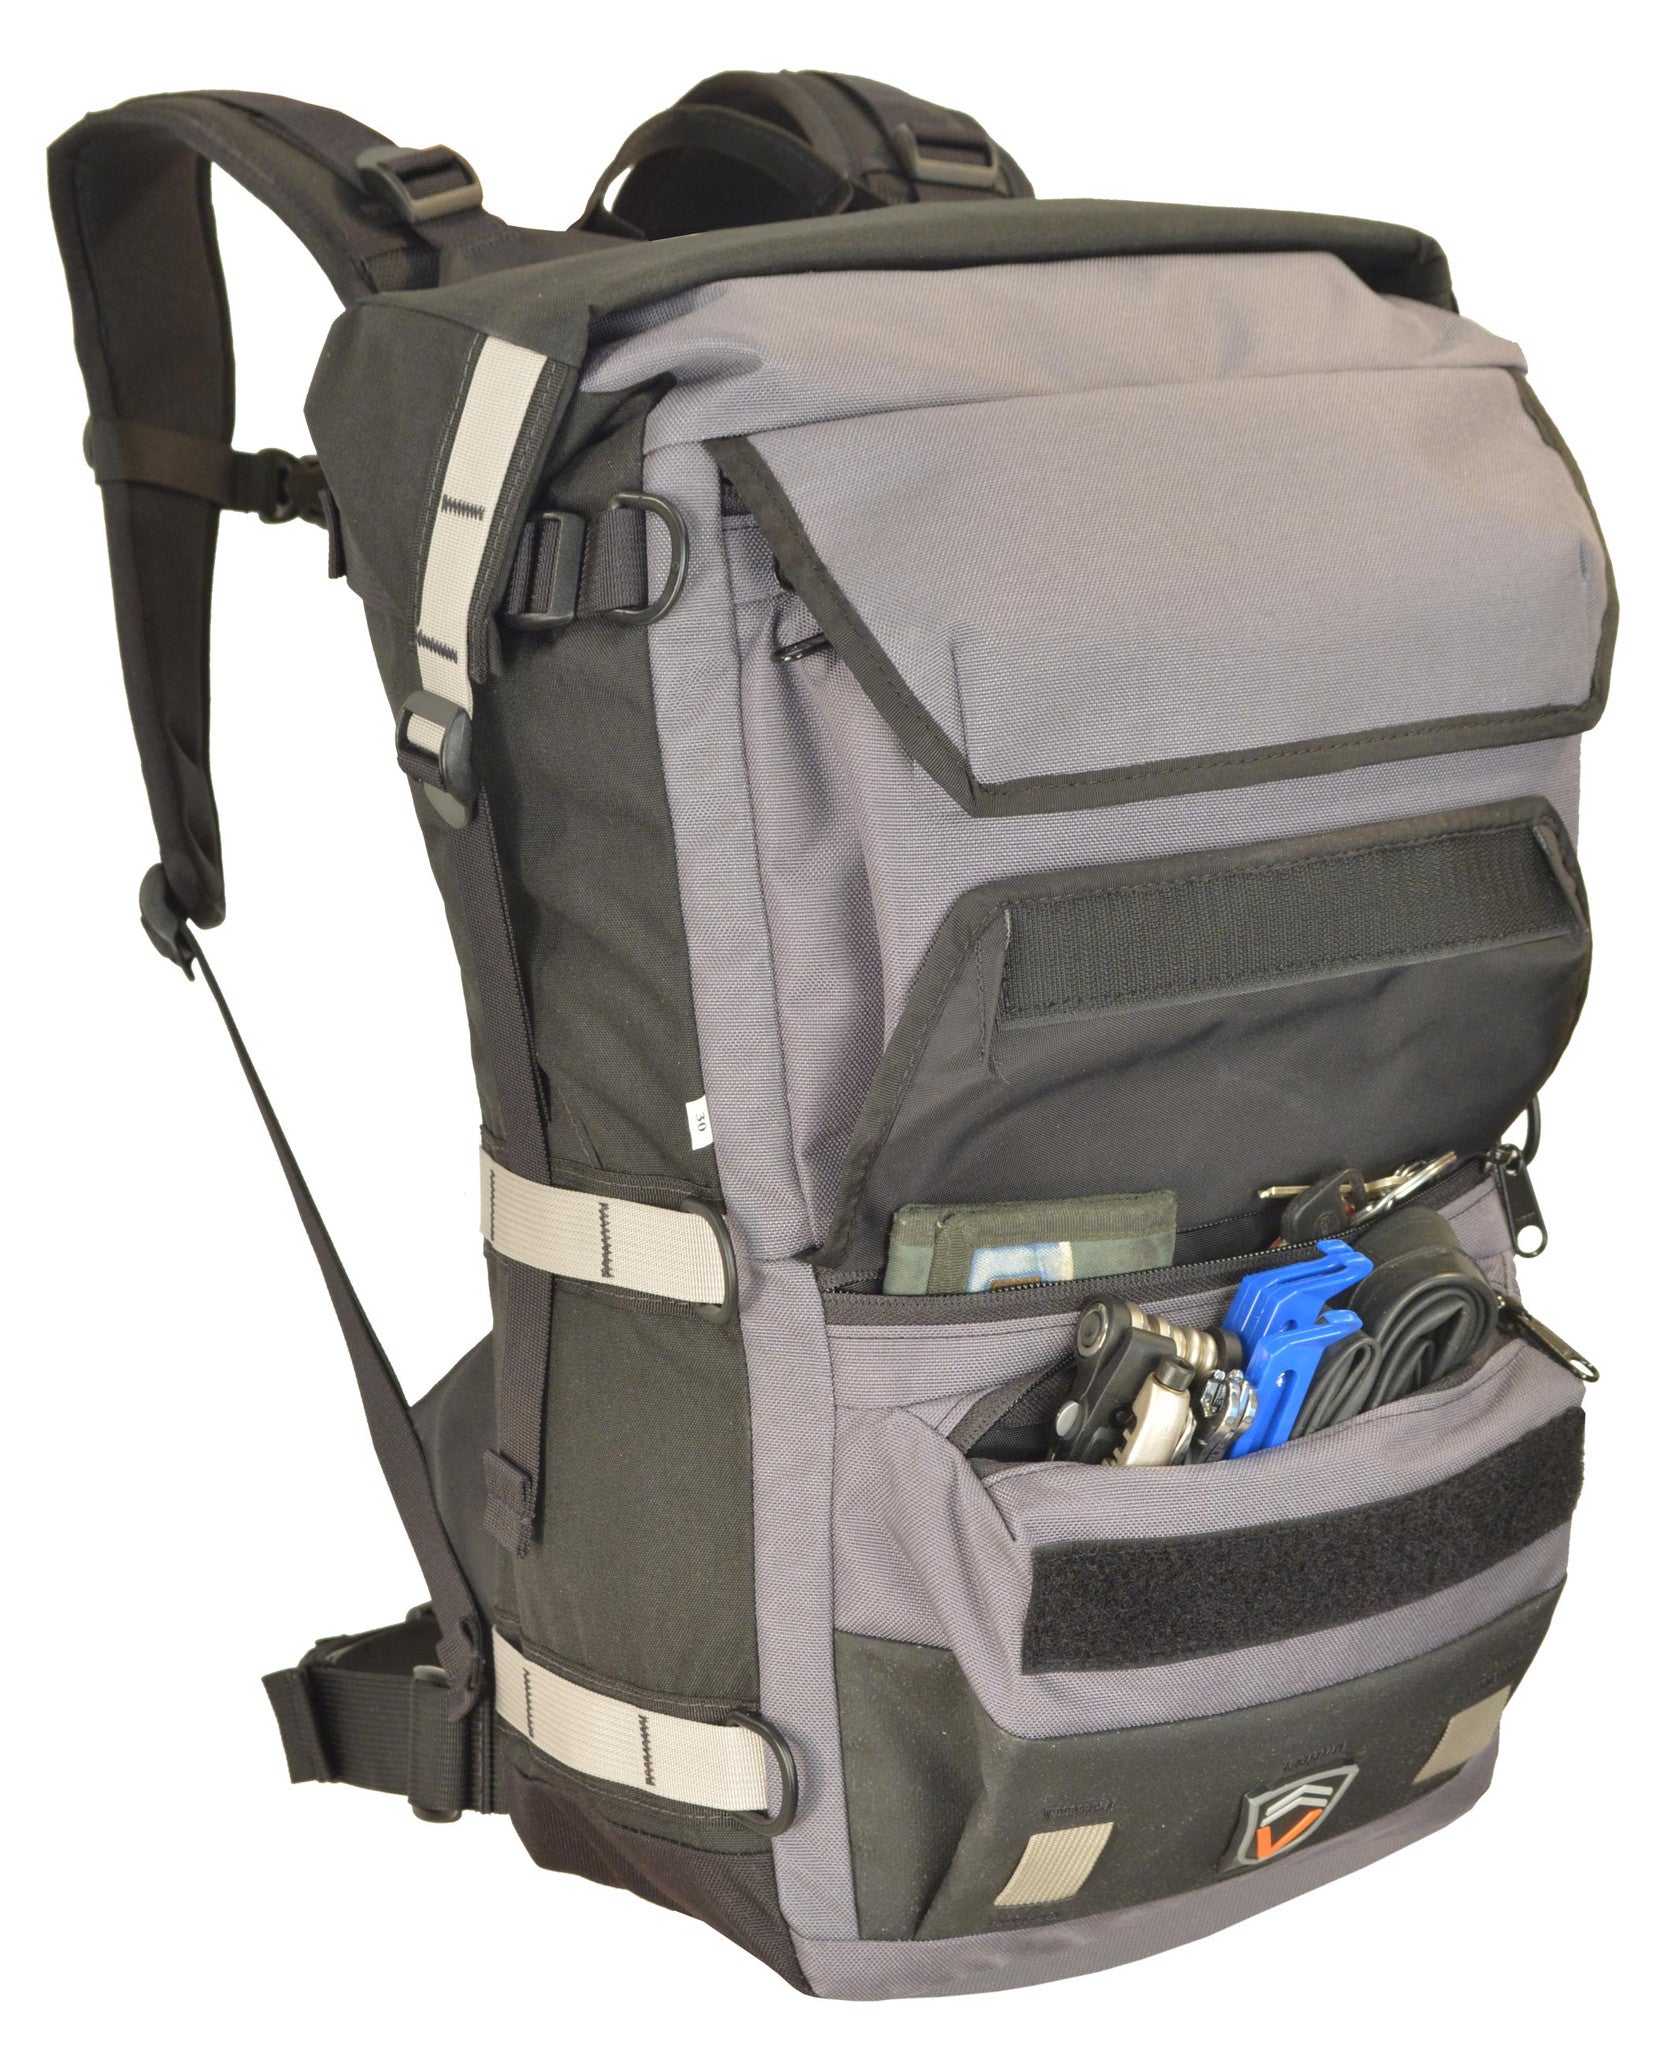 Burley Transit Backpack - Louisville Cyclery